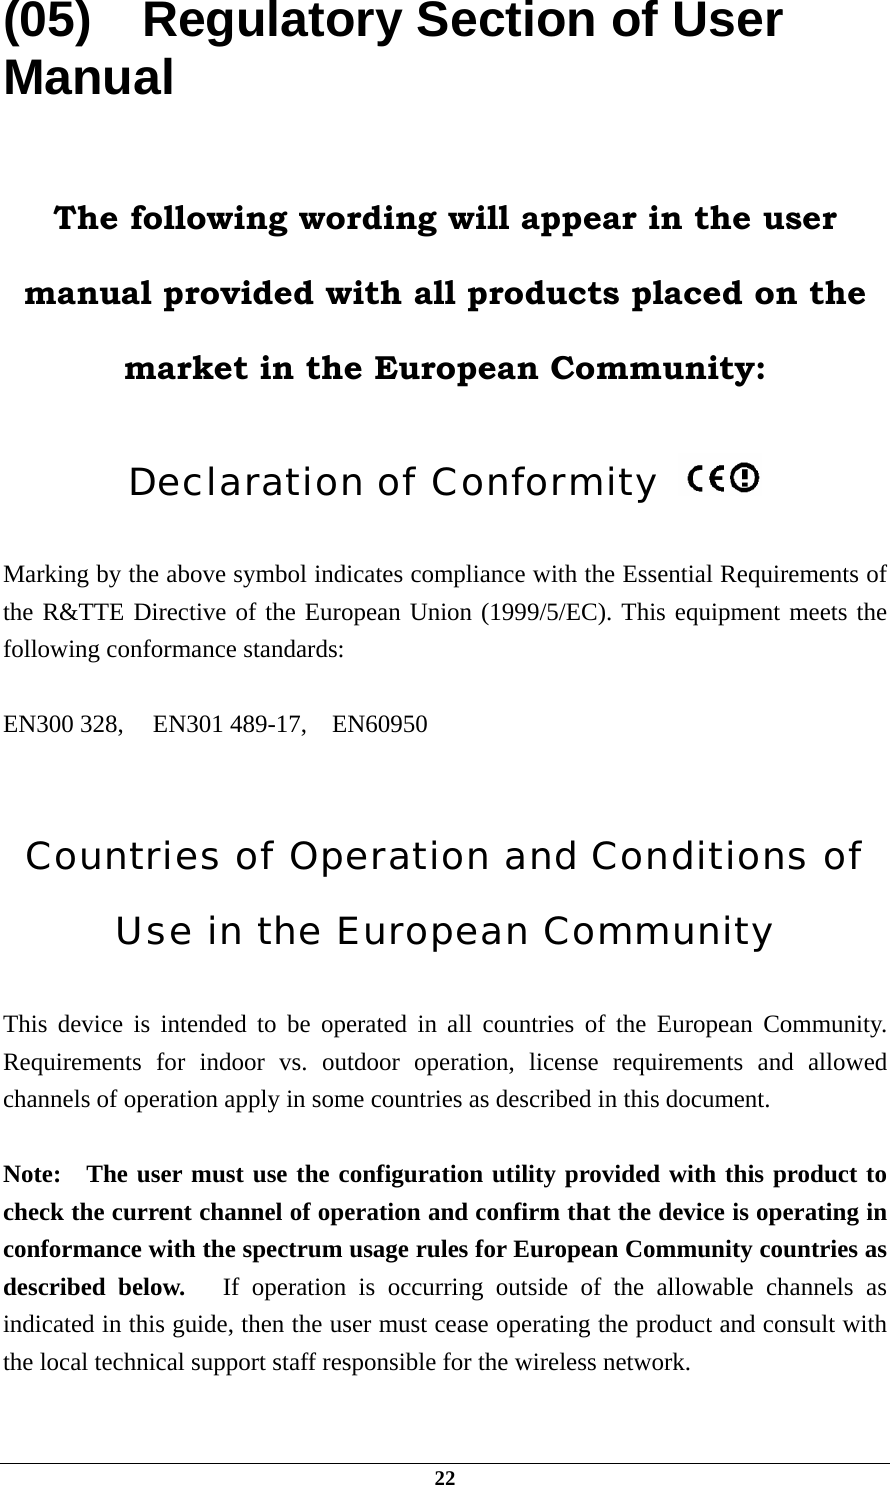  (05)    Regulatory Section of User Manual  The following wording will appear in the user manual provided with all products placed on the market in the European Community:  Declaration of Conformity    Marking by the above symbol indicates compliance with the Essential Requirements of the R&amp;TTE Directive of the European Union (1999/5/EC). This equipment meets the following conformance standards:  EN300 328,   EN301 489-17,  EN60950   Countries of Operation and Conditions of Use in the European Community  This device is intended to be operated in all countries of the European Community.  Requirements for indoor vs. outdoor operation, license requirements and allowed channels of operation apply in some countries as described in this document.  Note:  The user must use the configuration utility provided with this product to check the current channel of operation and confirm that the device is operating in conformance with the spectrum usage rules for European Community countries as described below.   If operation is occurring outside of the allowable channels as indicated in this guide, then the user must cease operating the product and consult with the local technical support staff responsible for the wireless network.  22 